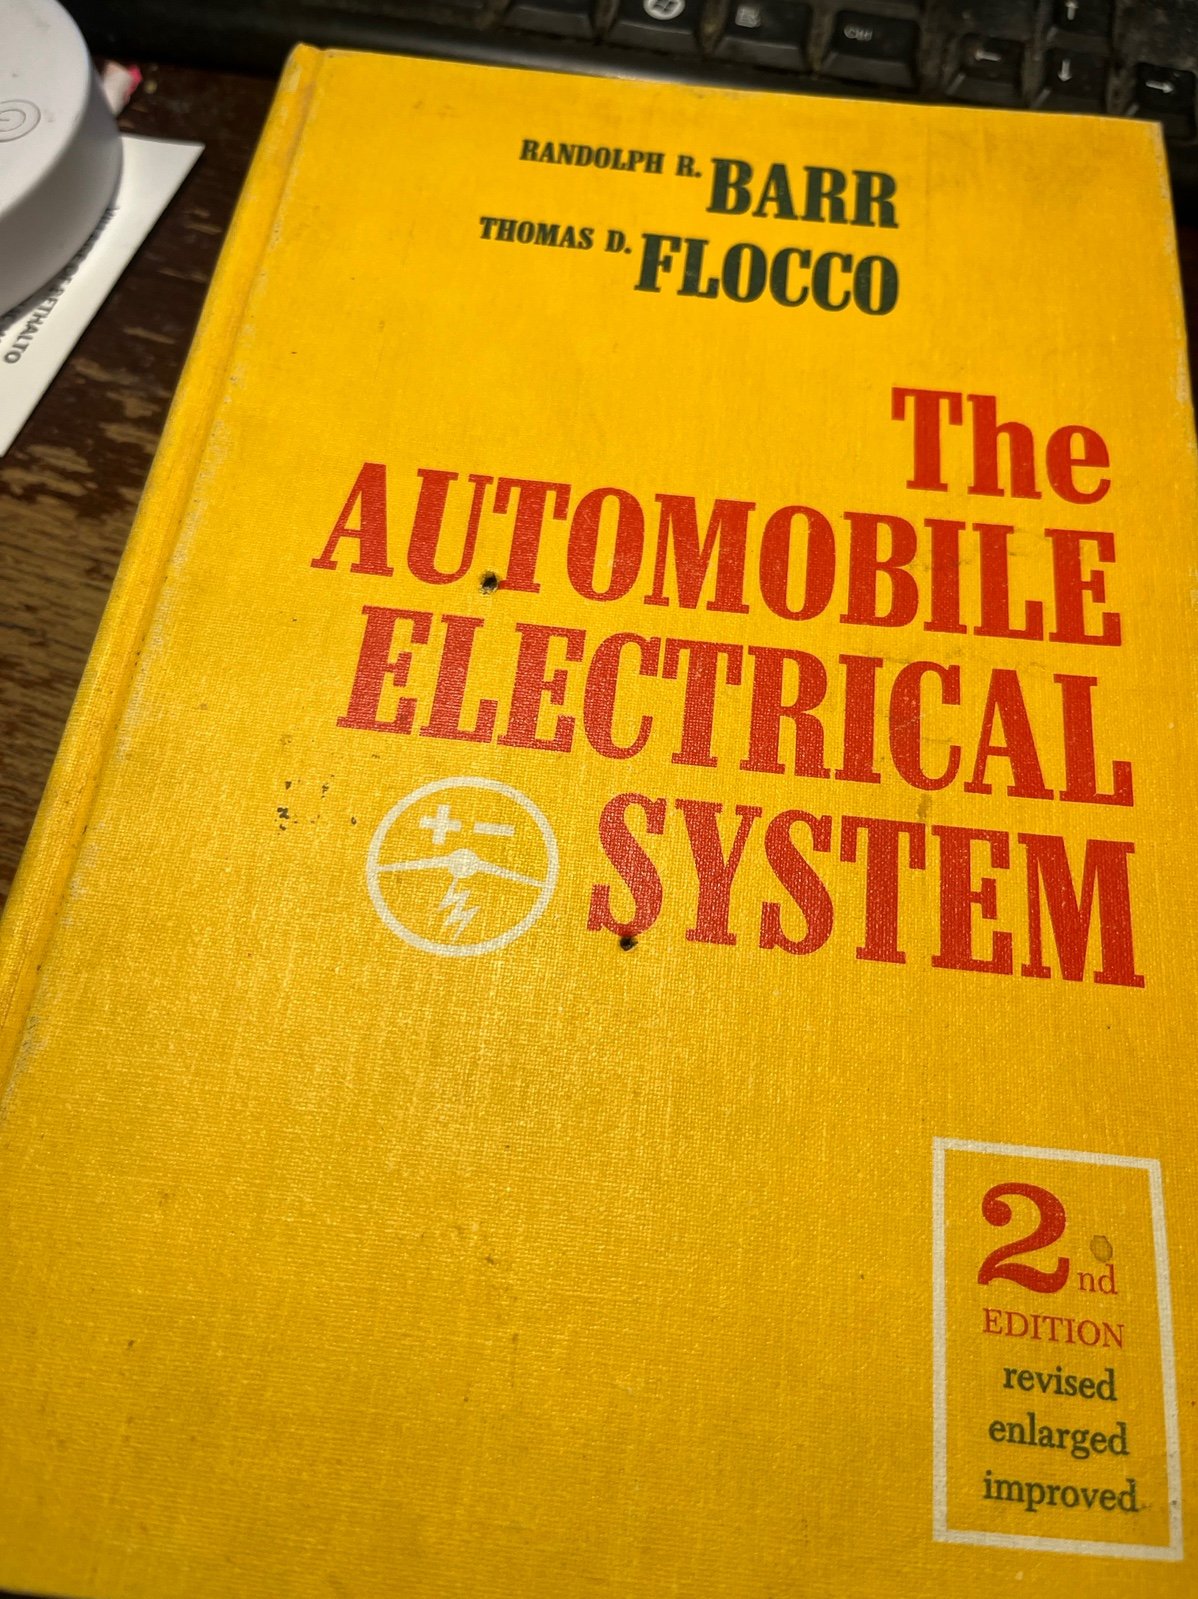 The Automobile electrical system book 2nd edition 1974 ARoHVOLdZ